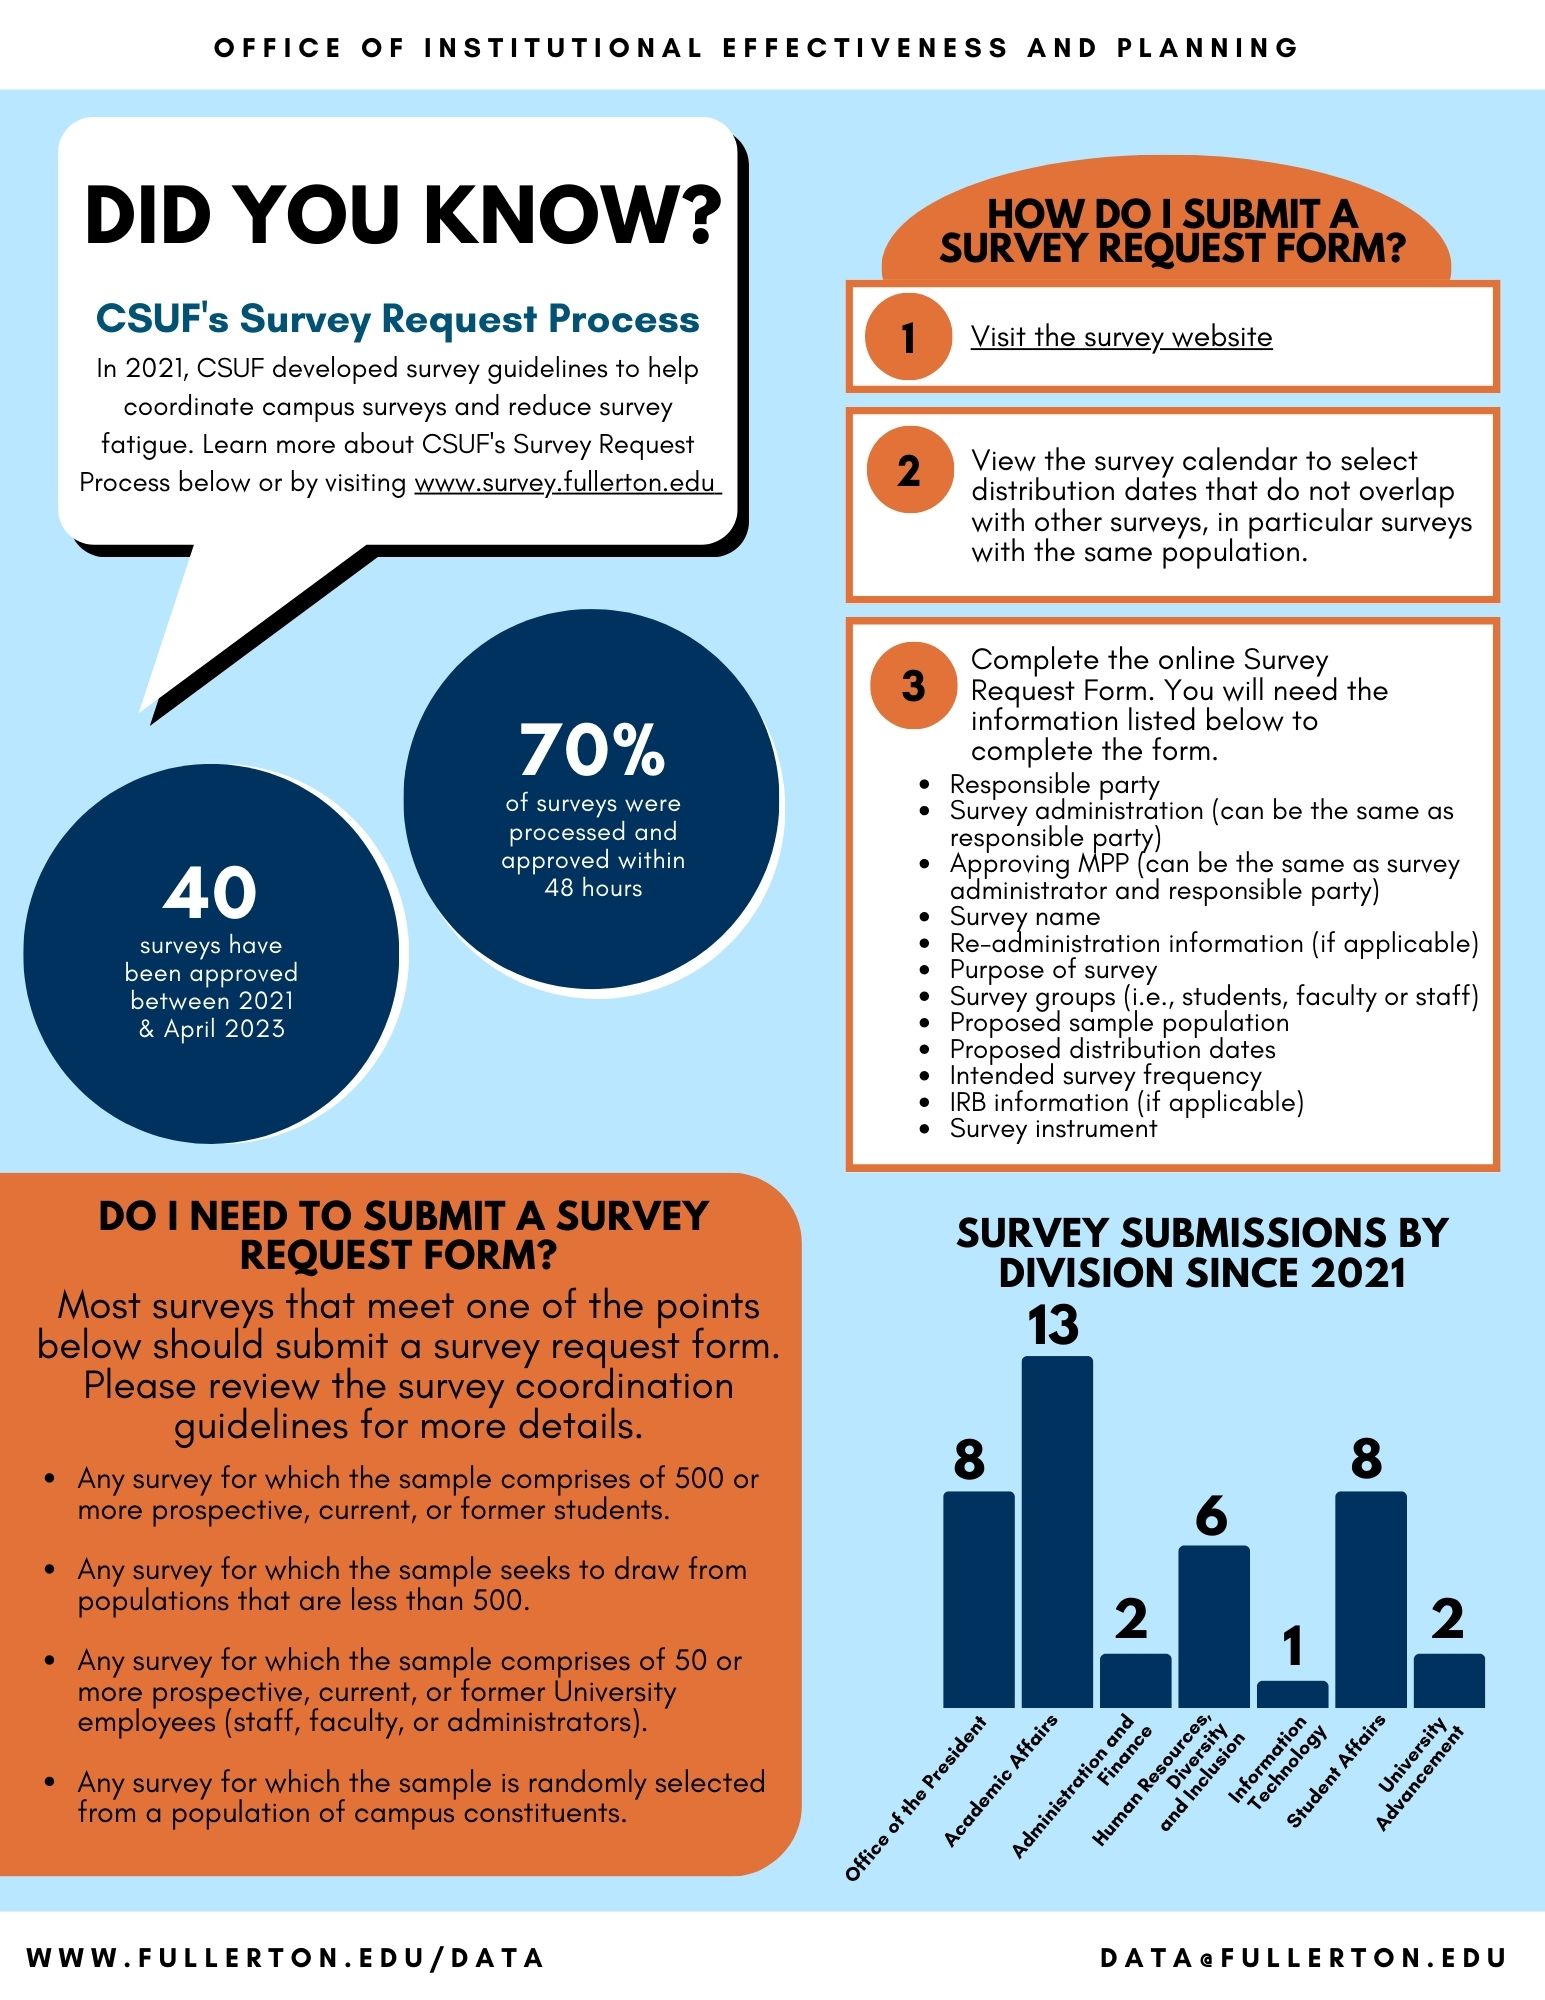 Did You Know? CSUF's Survey Request Process